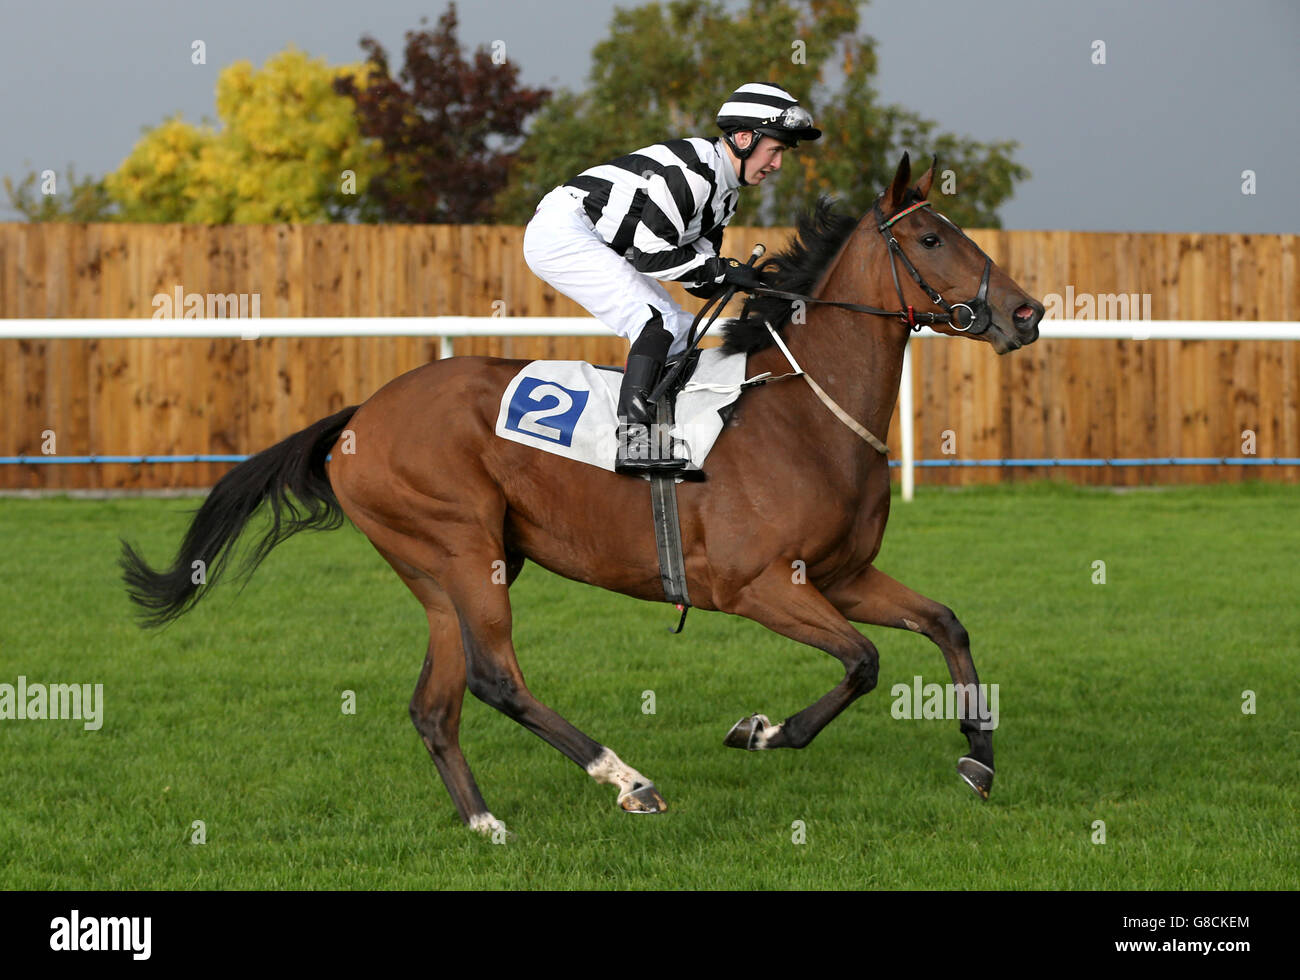 Agadoo ridden by Shane Gray goes to post at Leicester Racecourse. PRESS ASSOCIATION Photo. Picture date: Tuesday October 6, 2015. See PA story RACING Leicester. Photo credit should read: Simon Cooper/PA Wire. Stock Photo